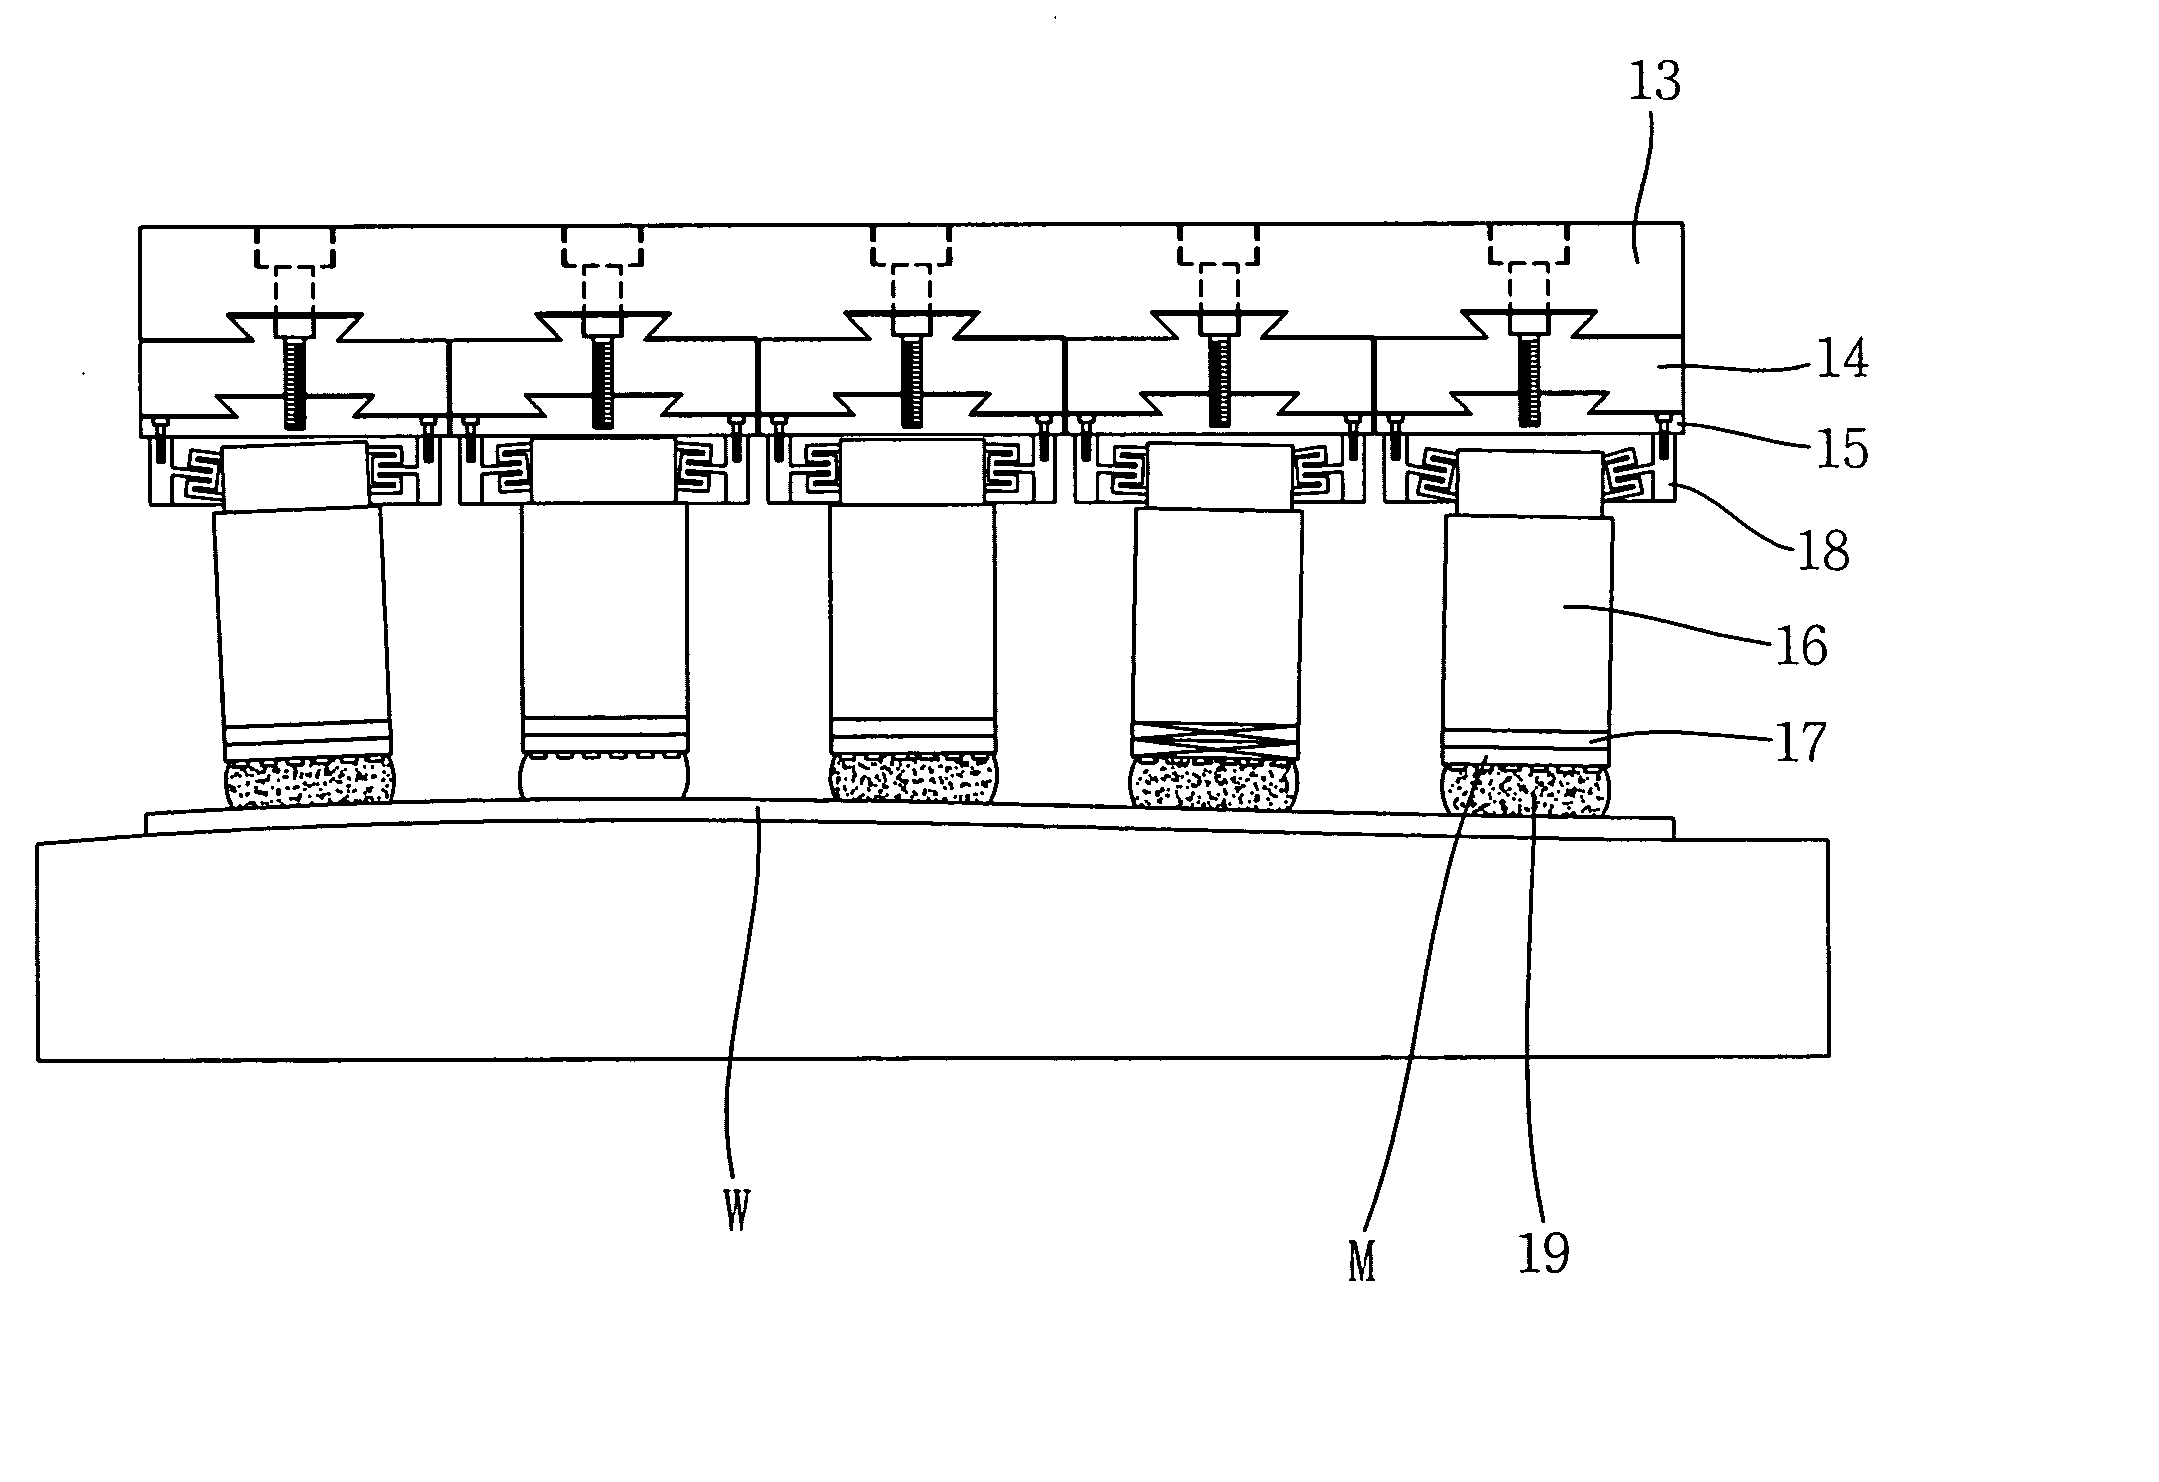 Imprinting apparatus with independently actuating separable modules